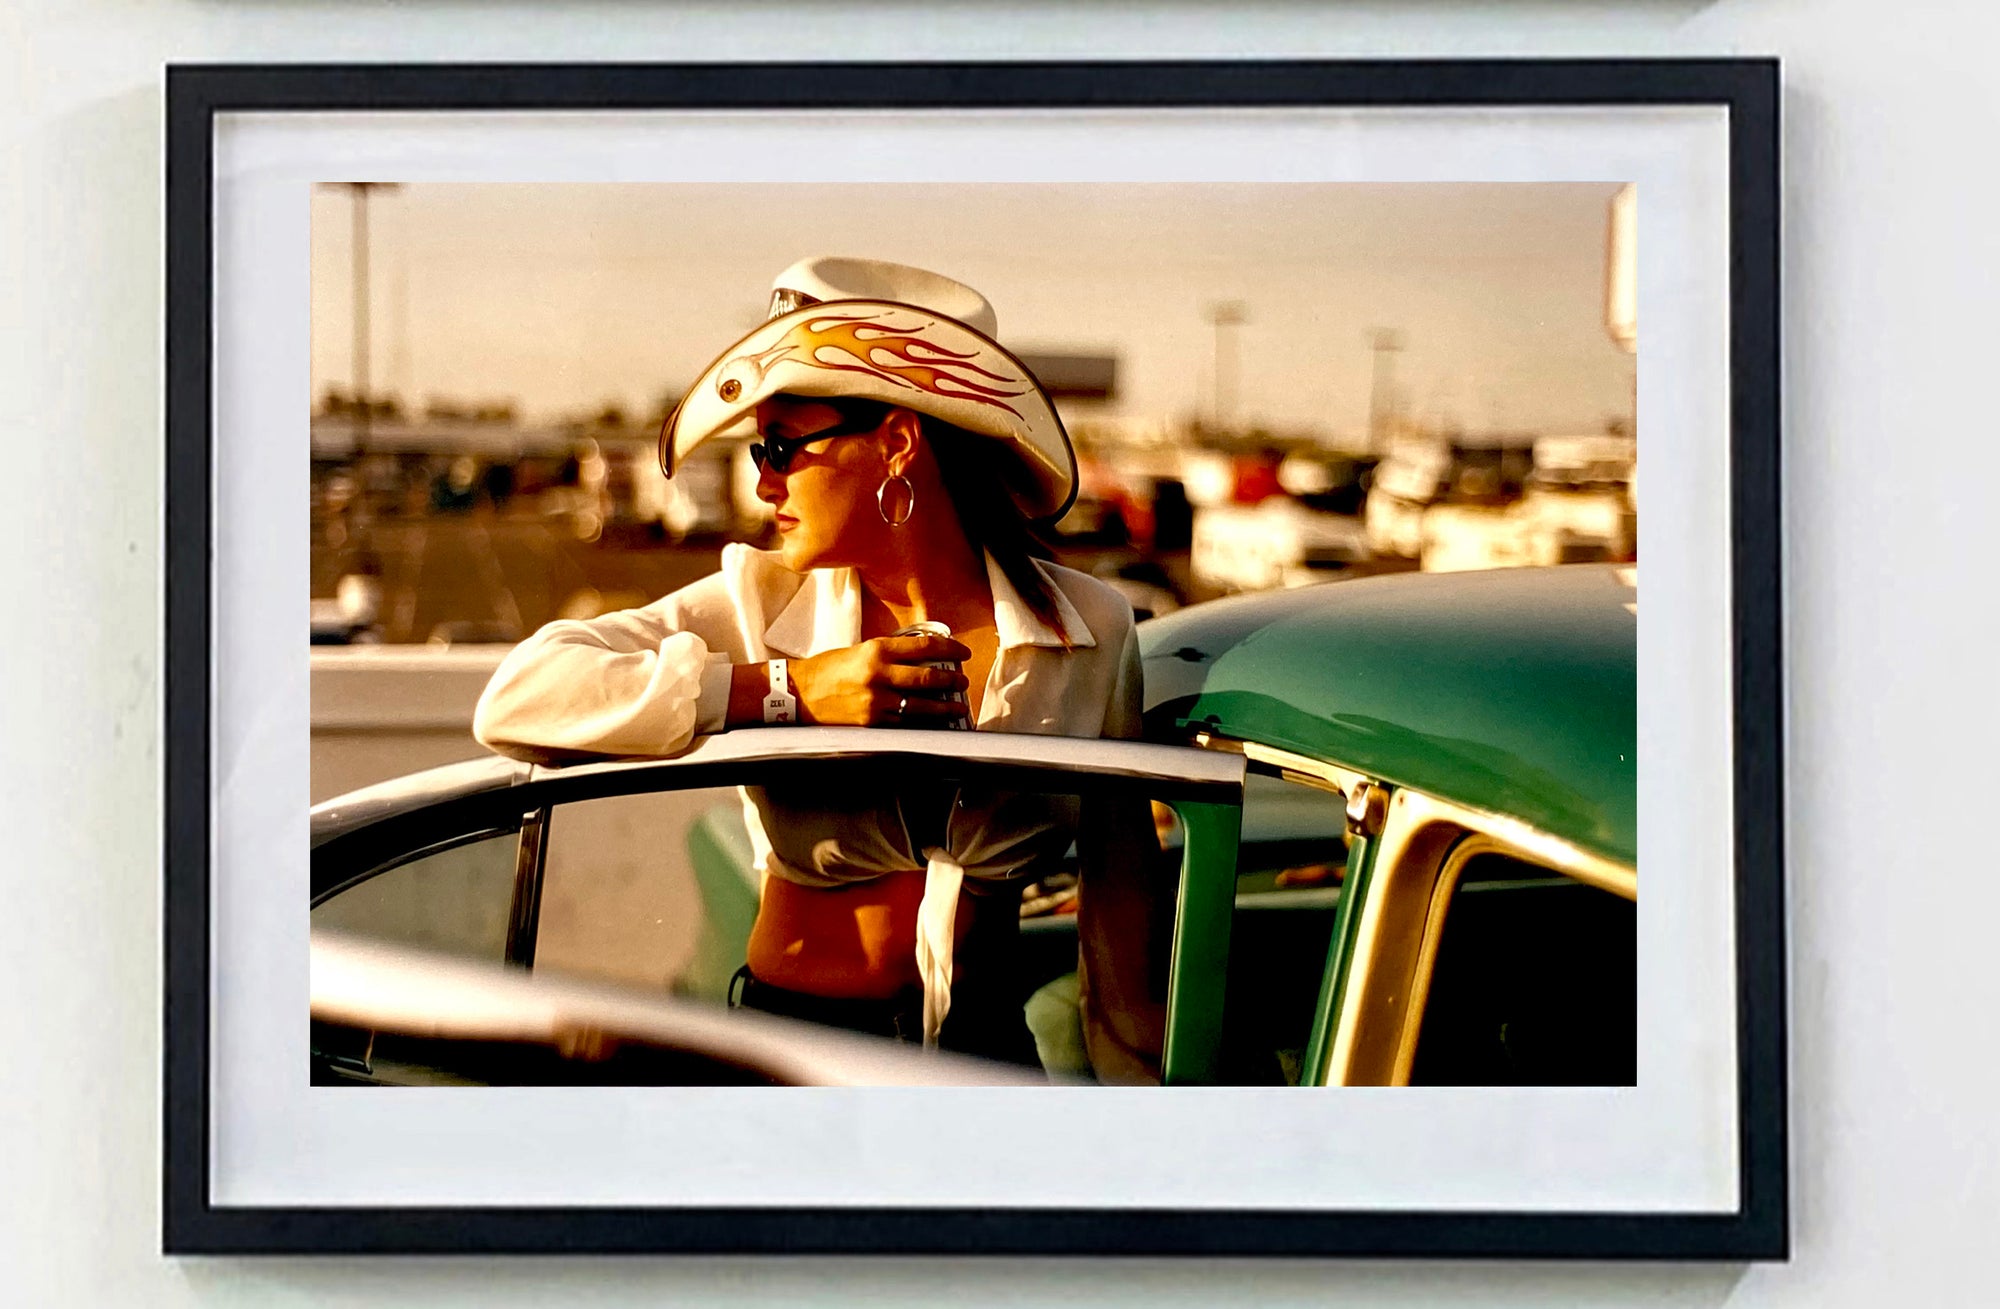 'Sun Kissed Wendy', from Richard Heeps' 'Man's Ruin' Series. This piece is part of a sequence of artworks capturing Wendy at the Rockabilly Weekender, Viva Las Vegas. This cinematic portrait of Wendy captures her kissed by the sunset.